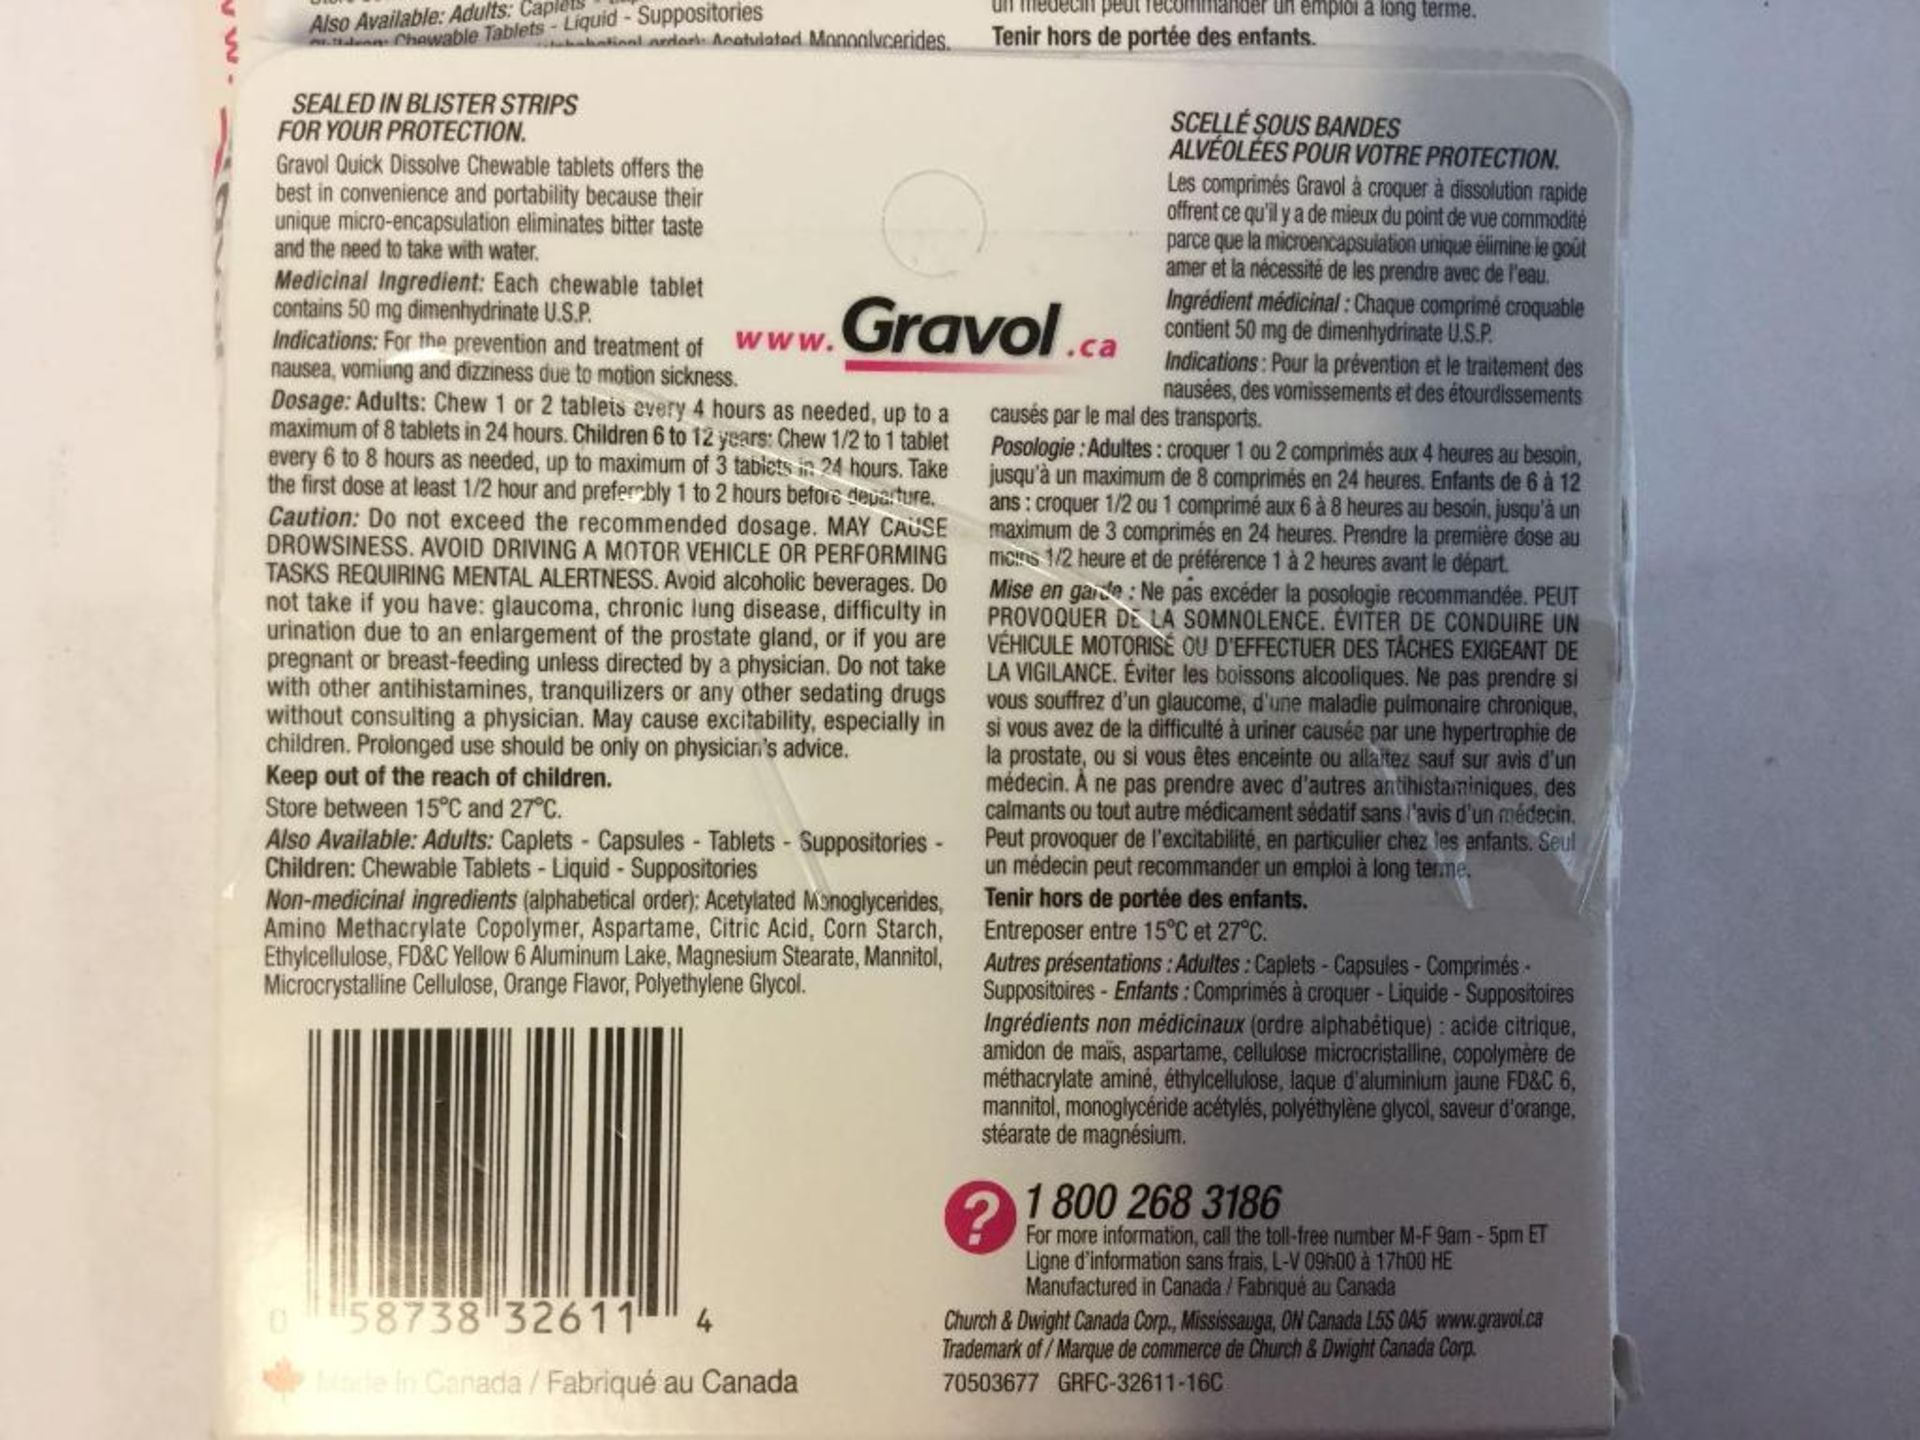 Gravel Quick Dissolve Chewable Tablets - 50mg x 2 - Image 2 of 2